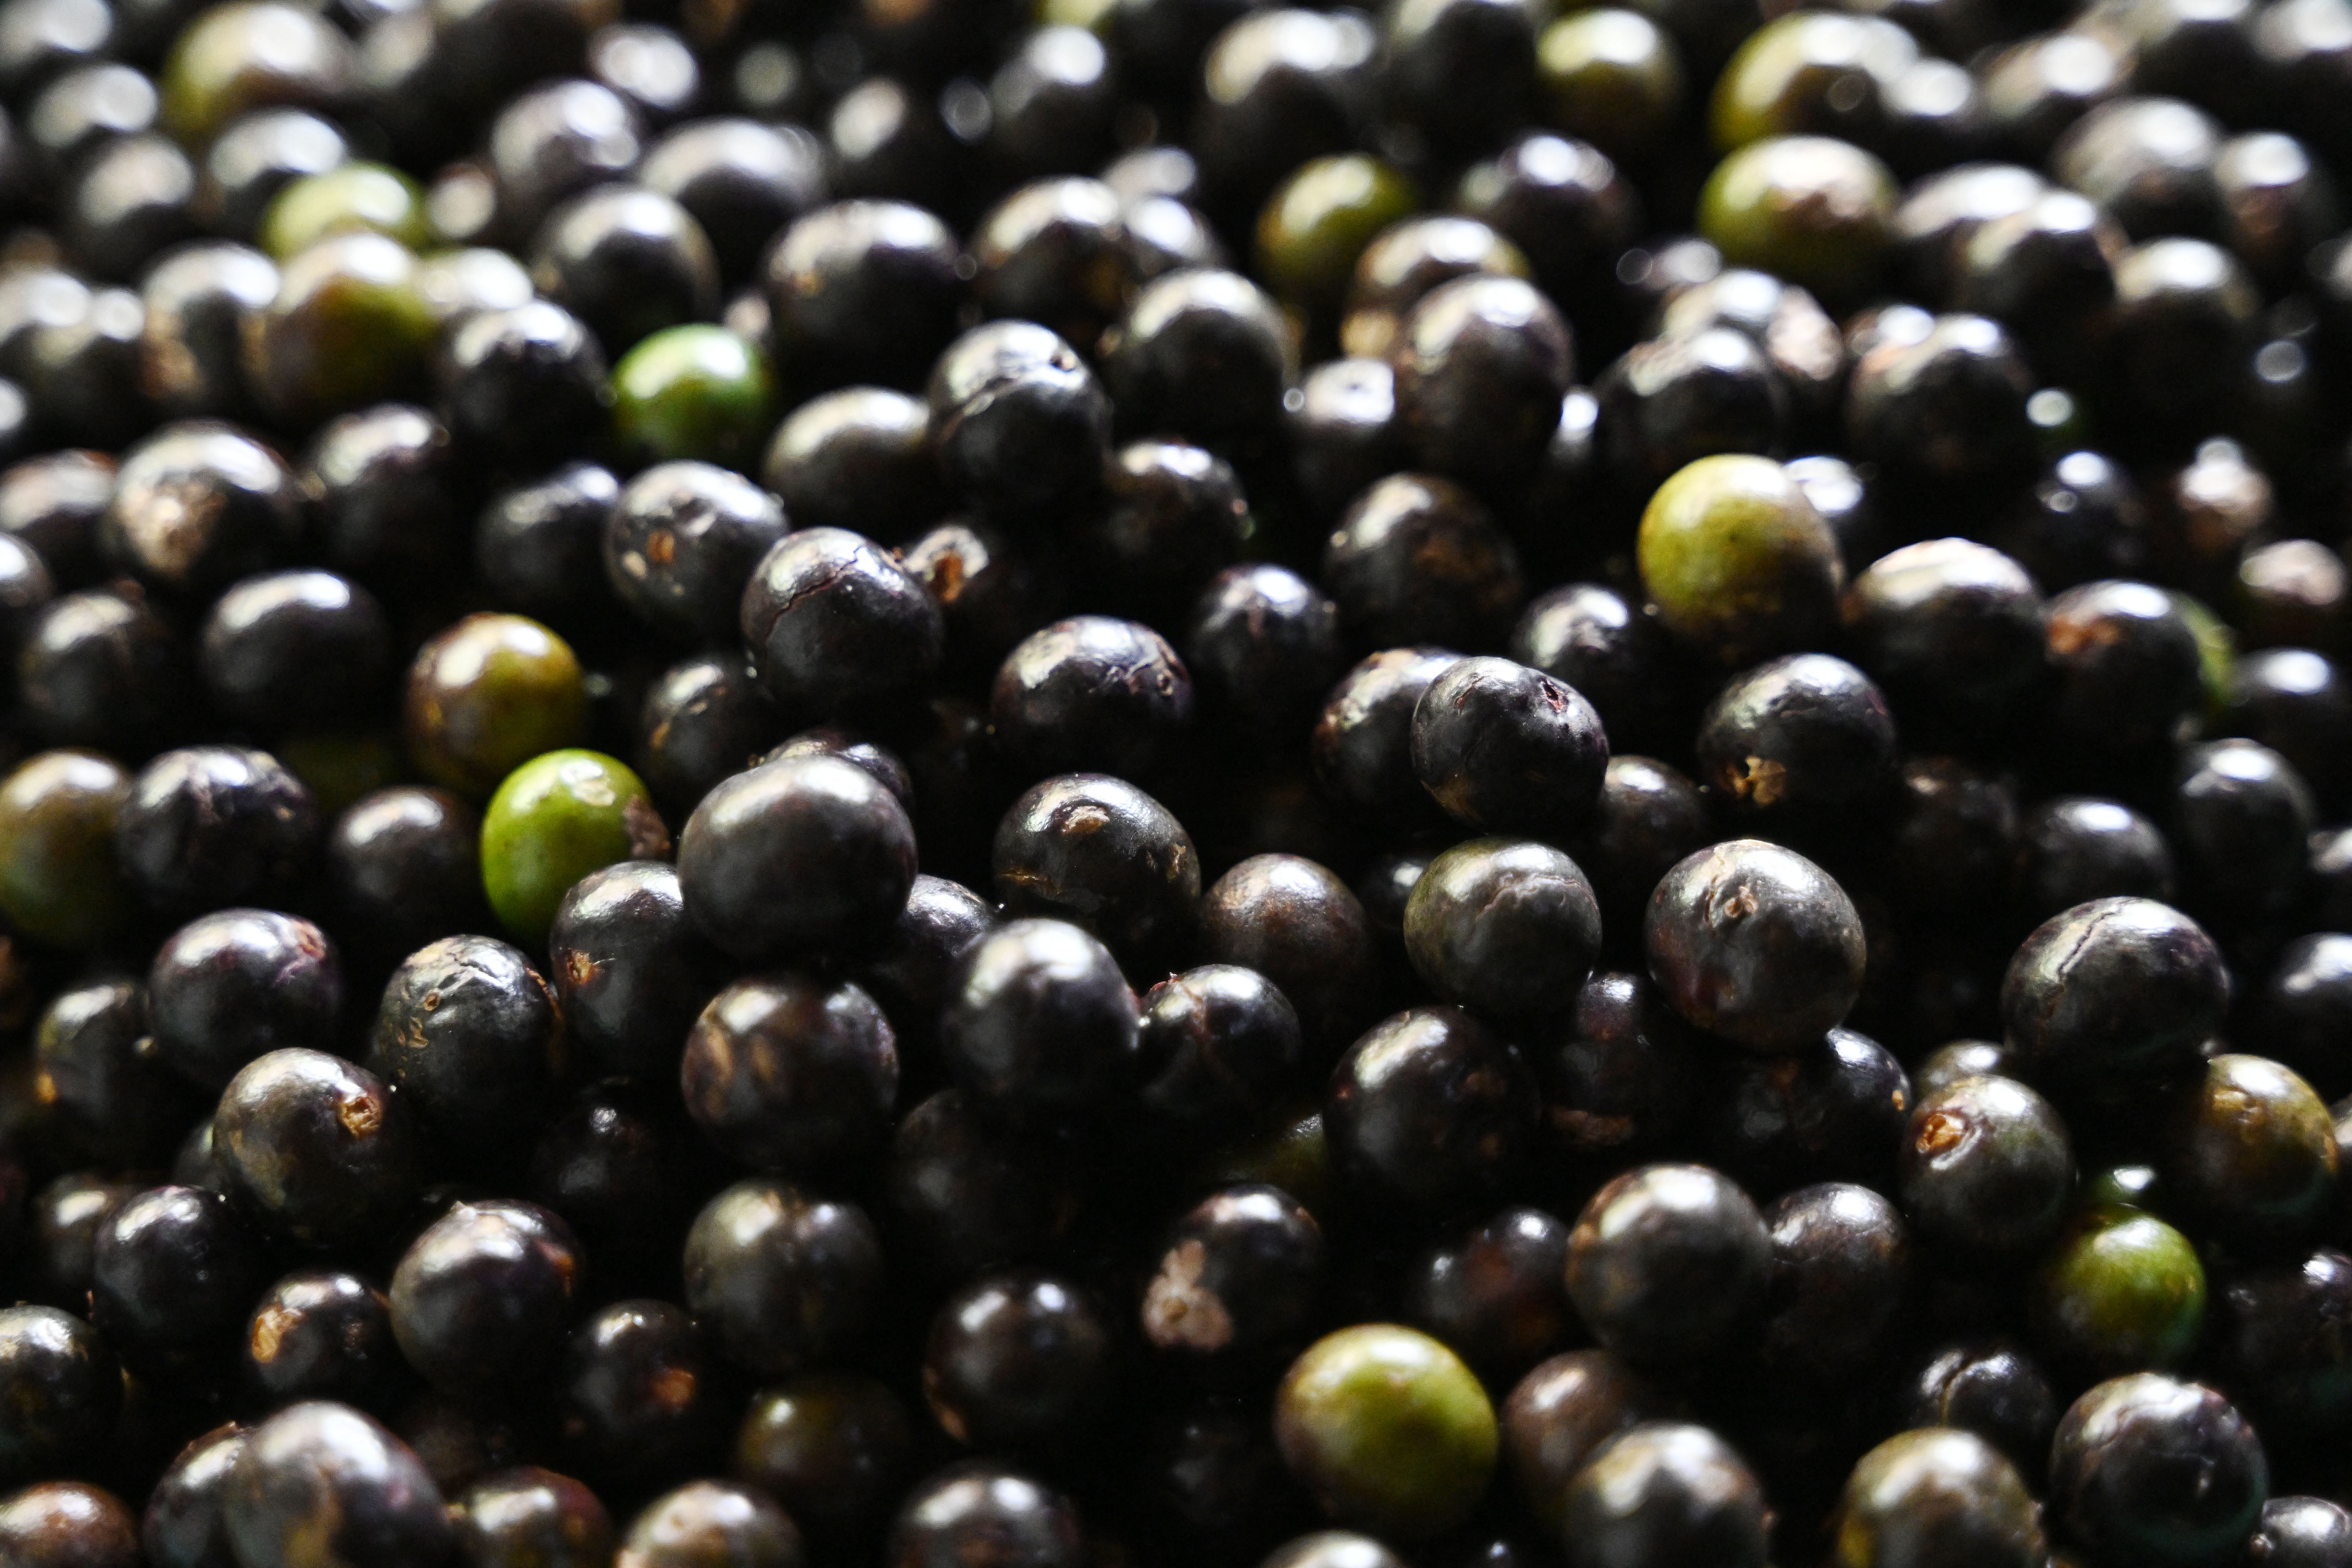 Acai berry craze: Boon or threat for the Amazon?